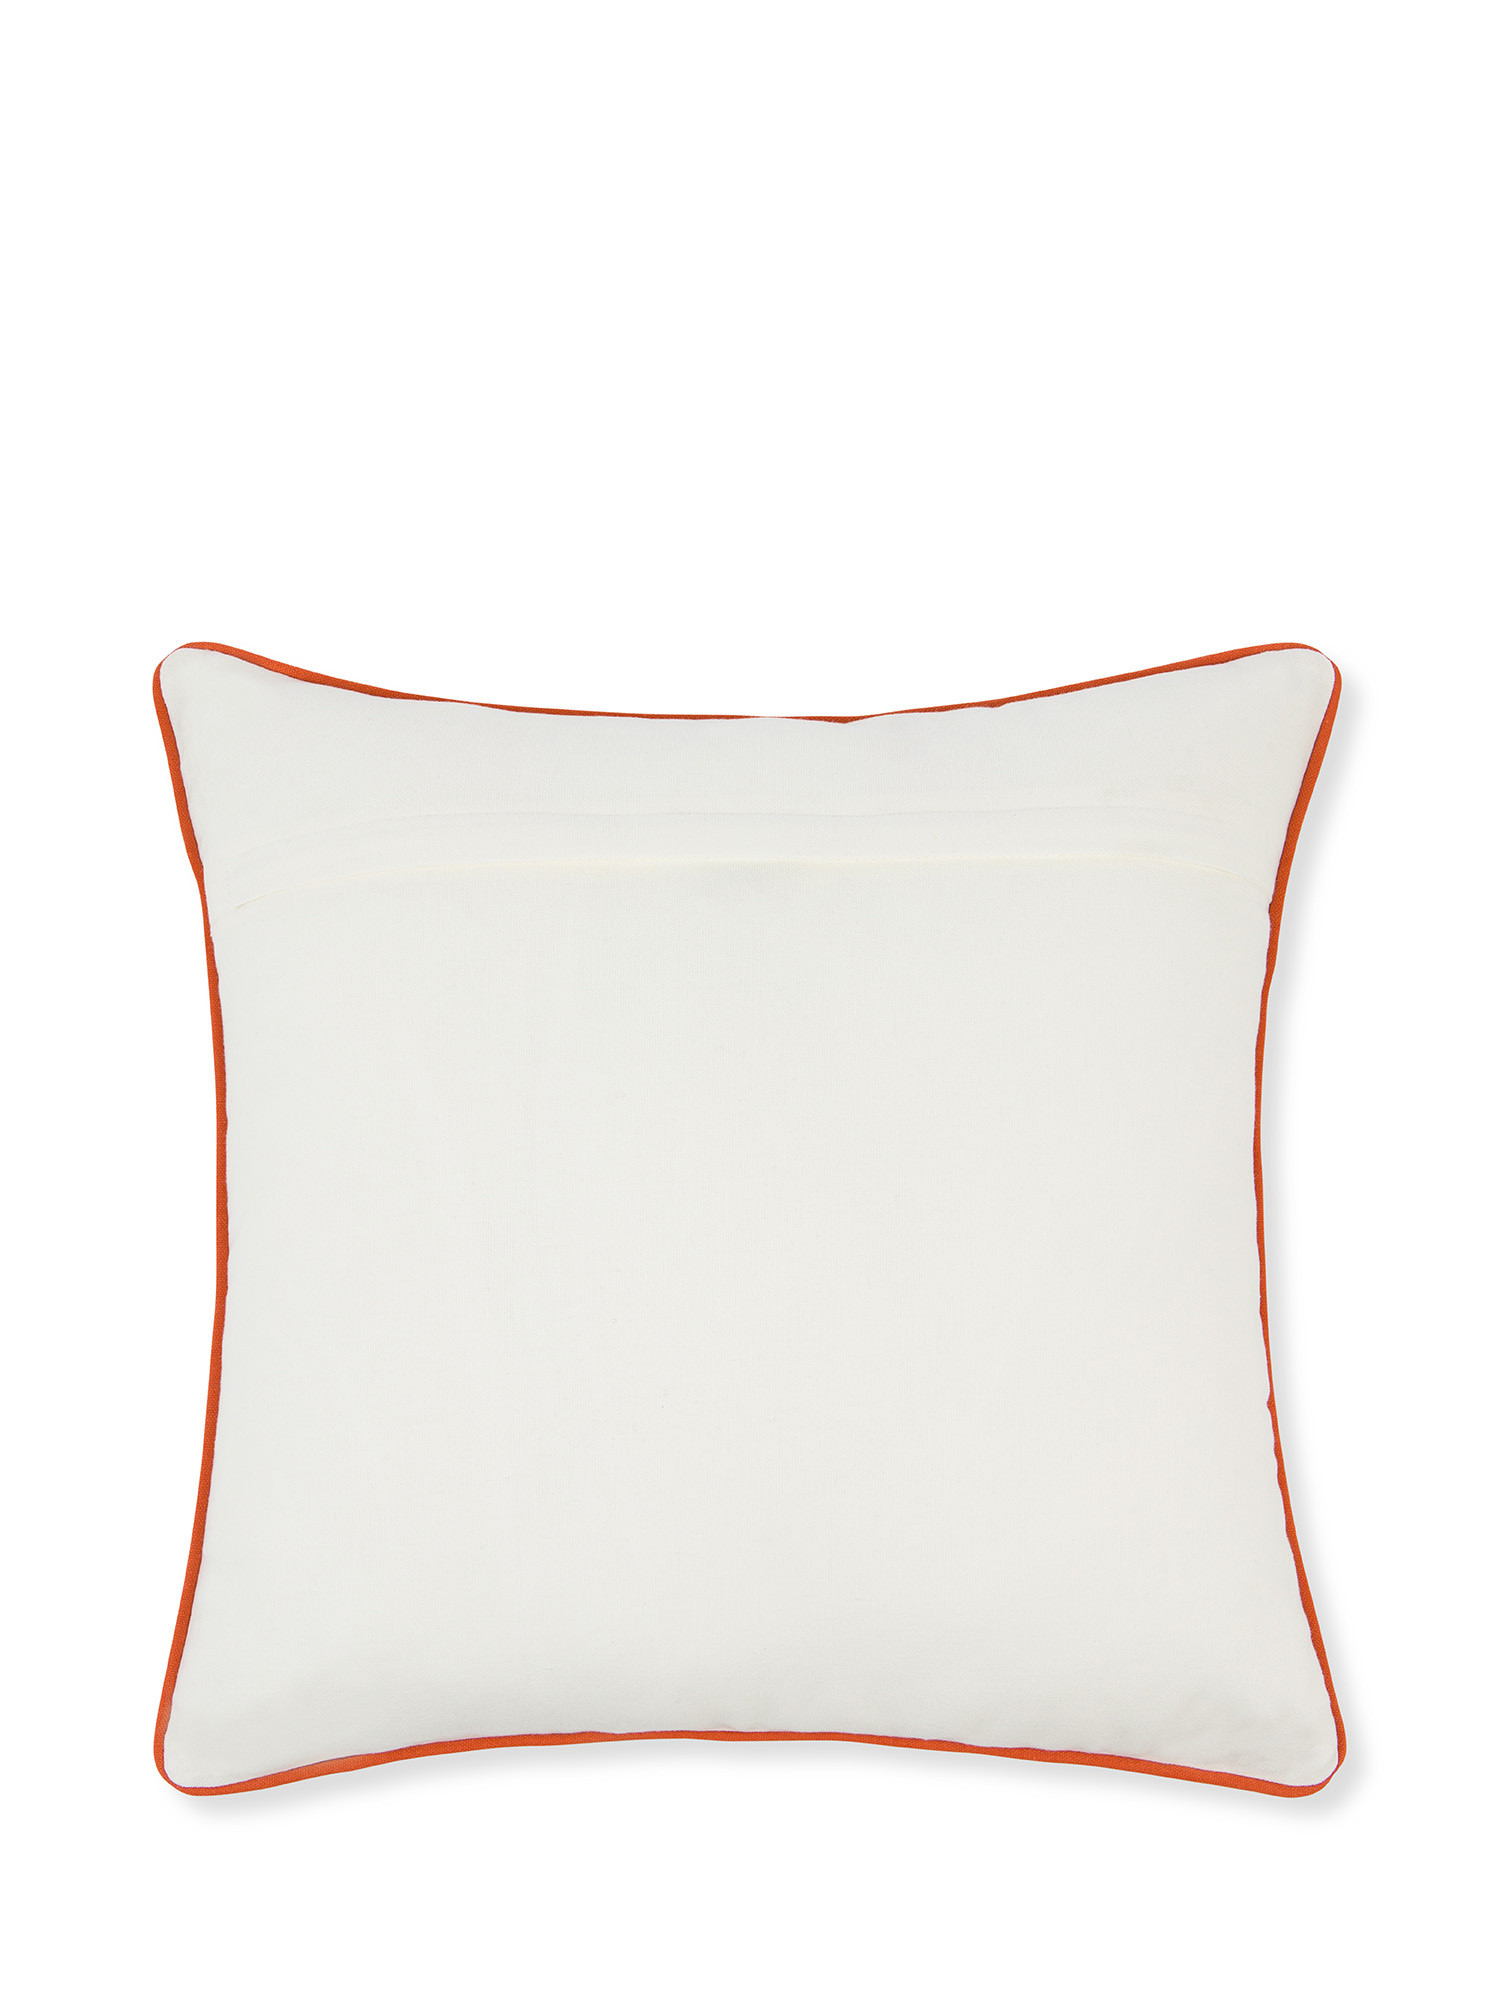 Embroidered cushion with geometric pattern and applications 45x45cm, Orange, large image number 1